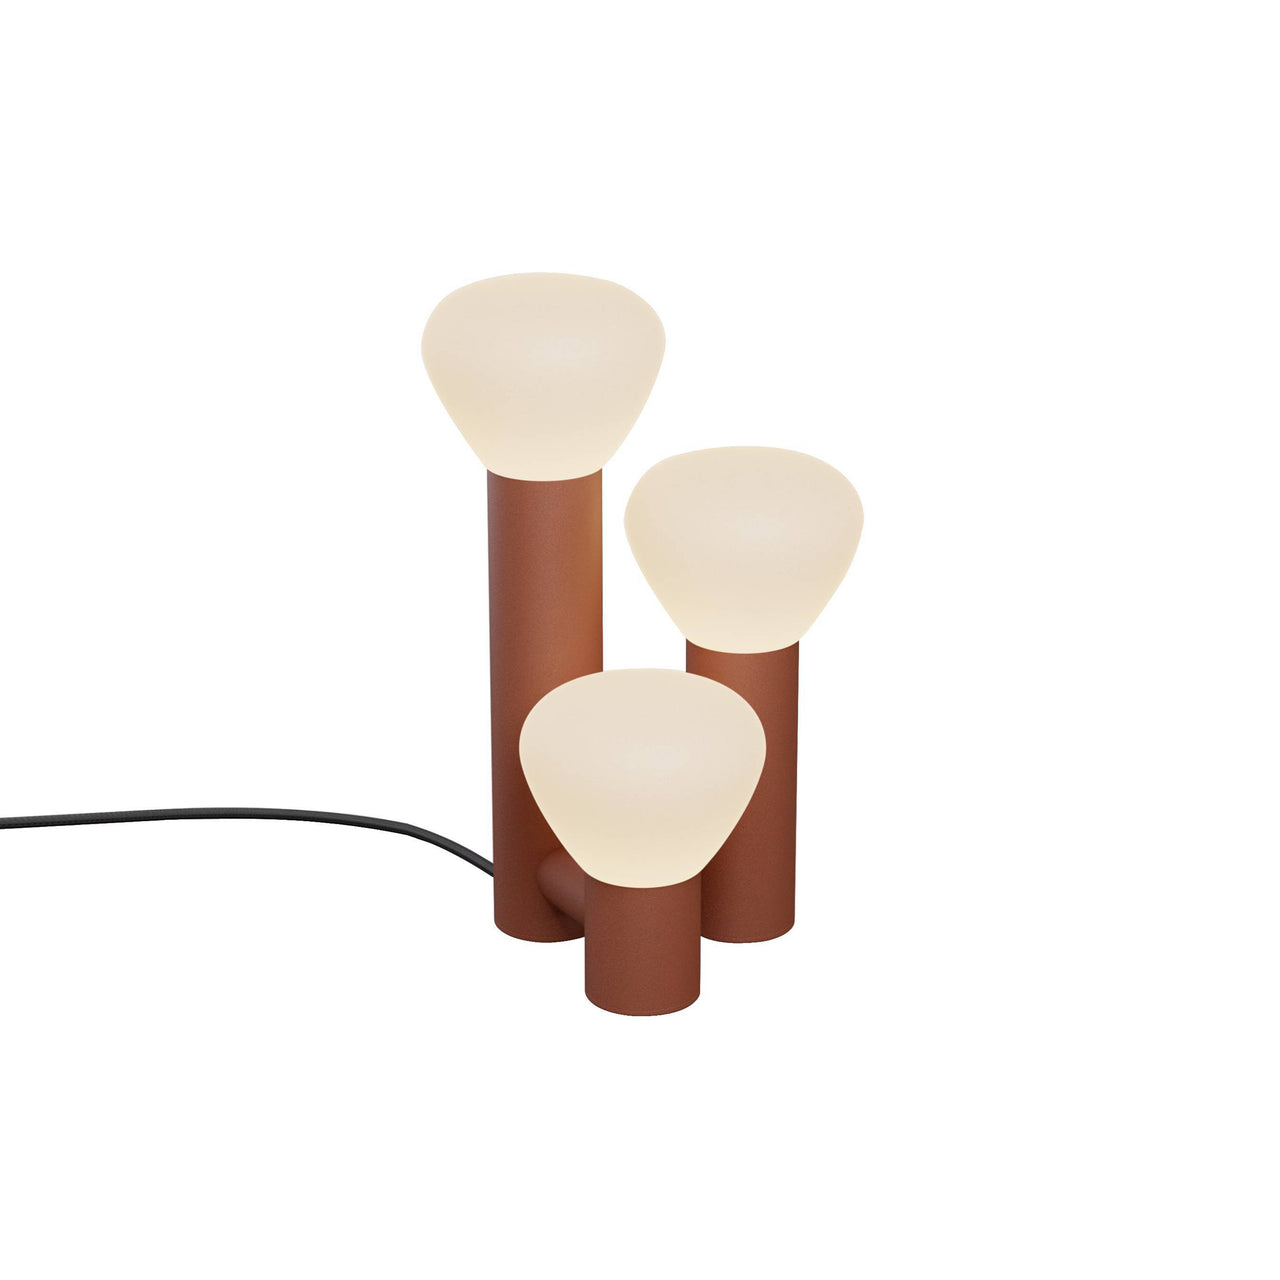 Parc 06 Table Lamp: Handswitch + Terracotta + Black